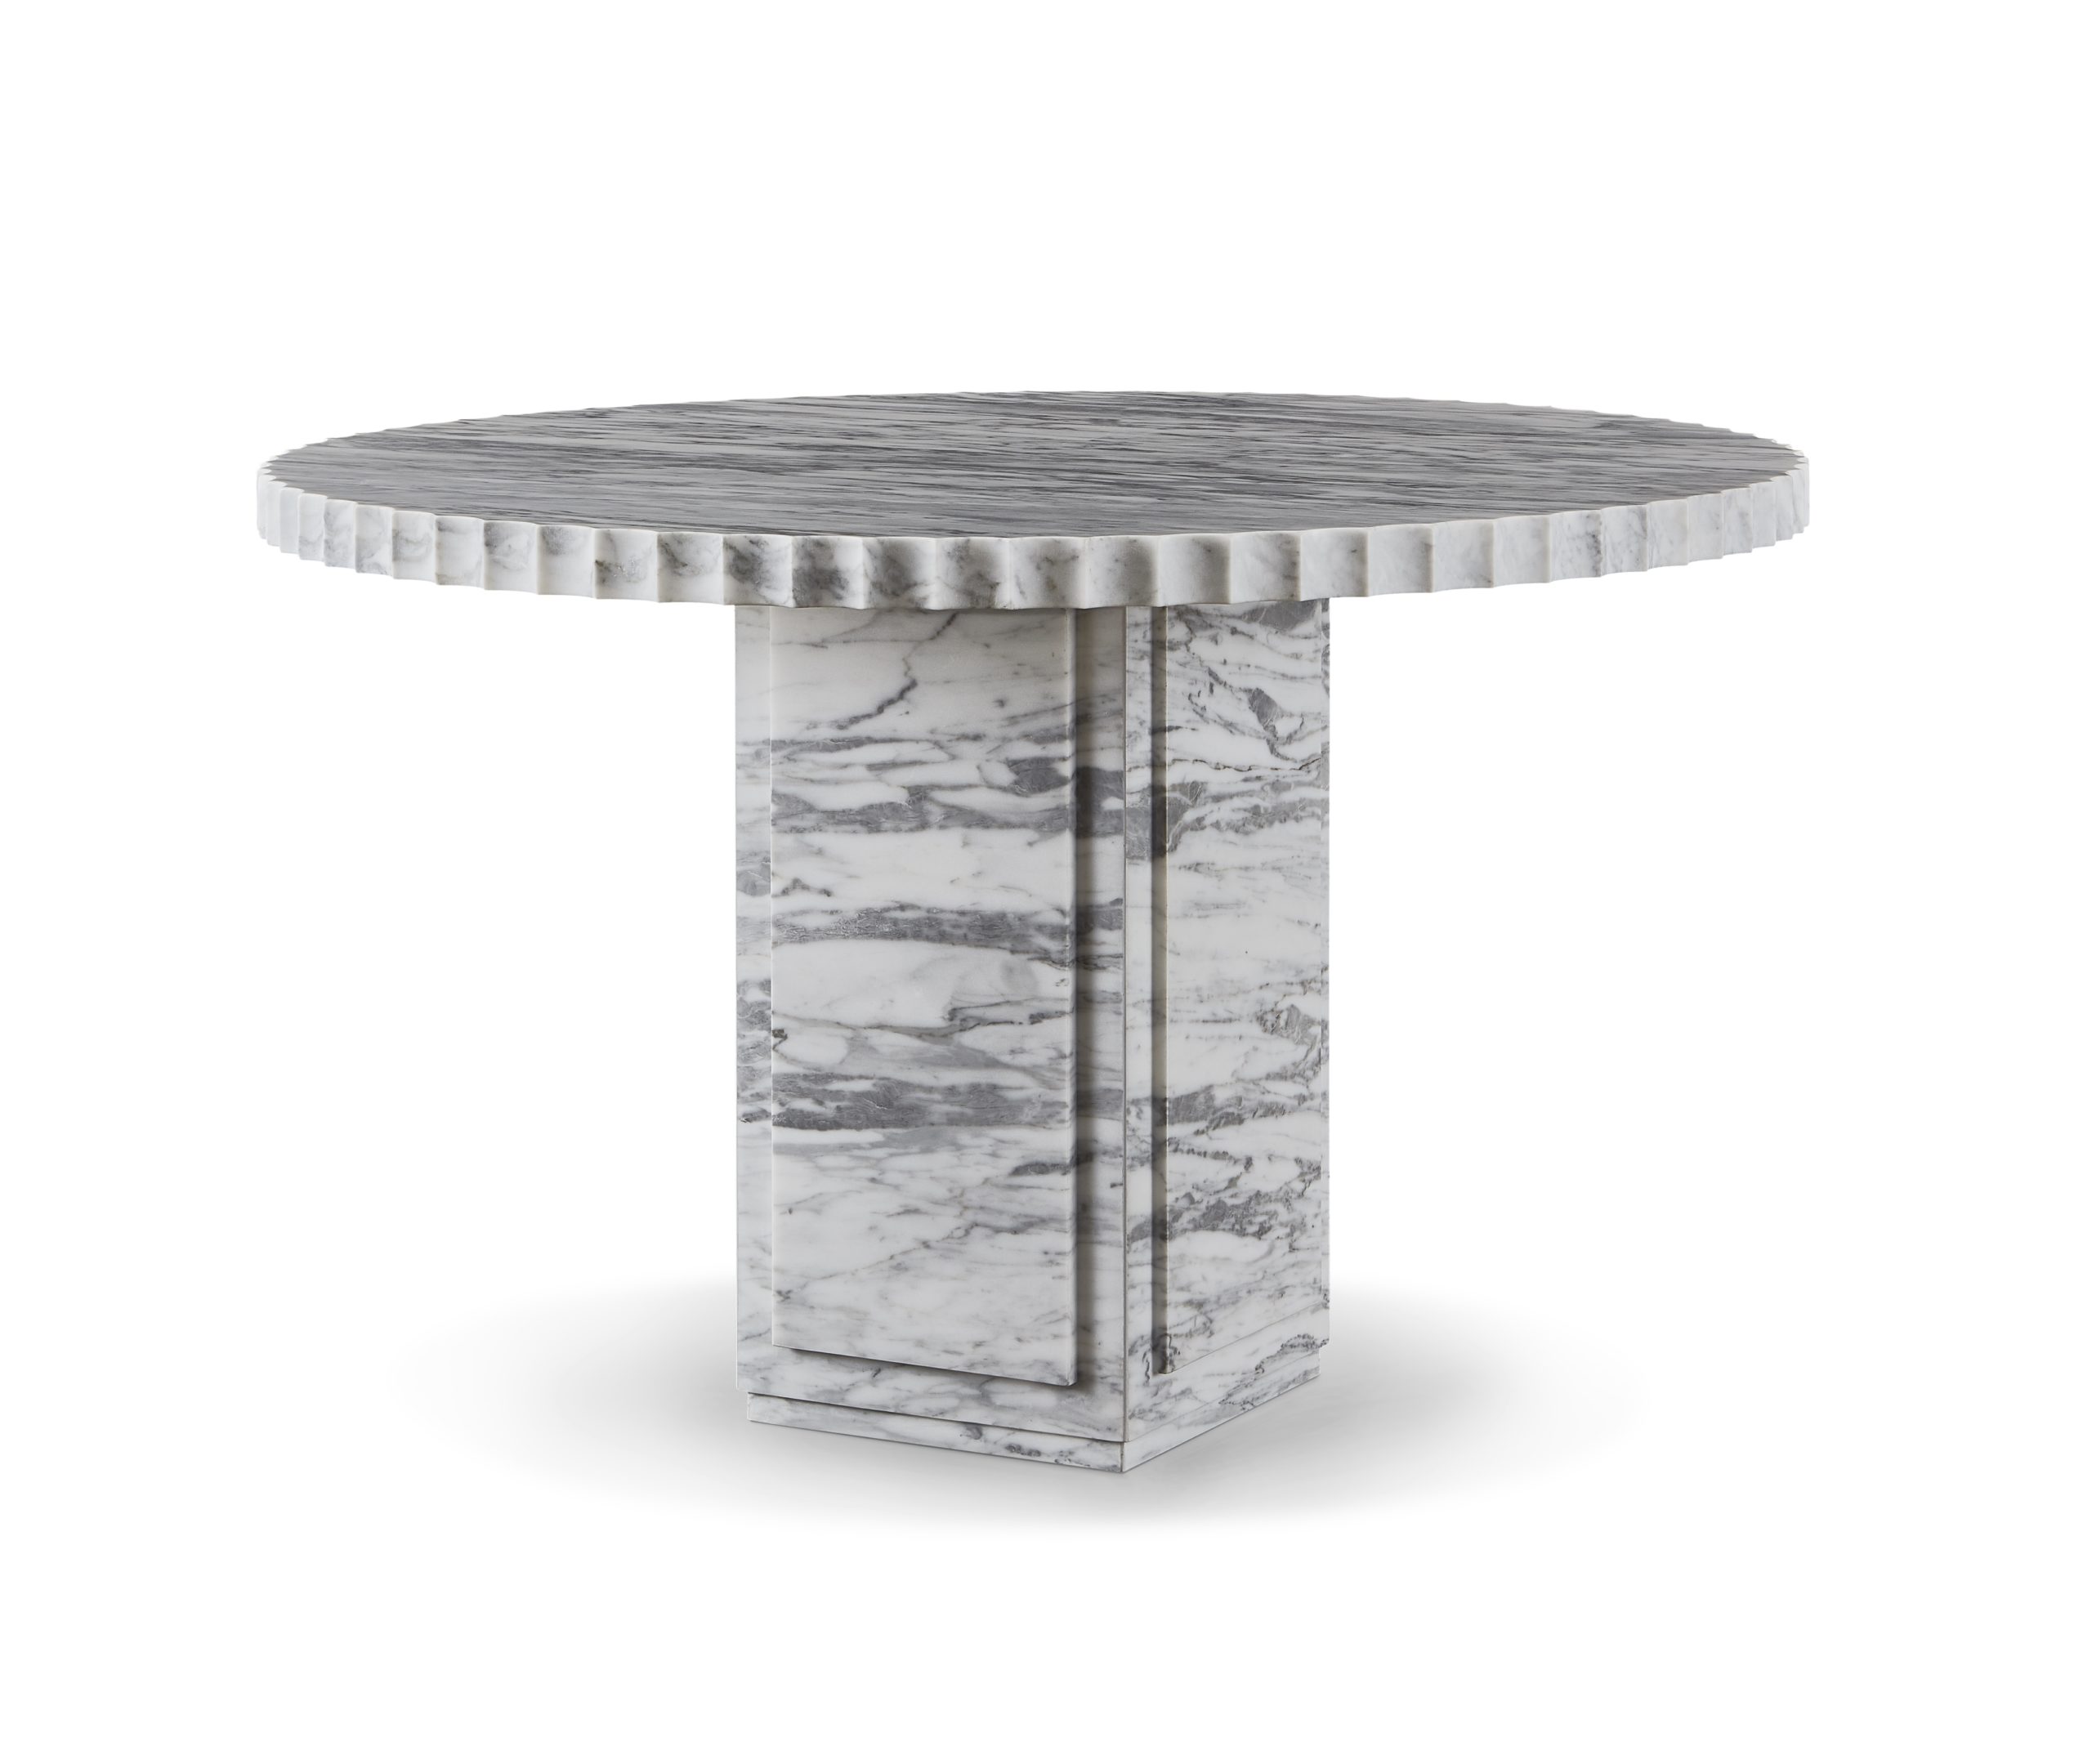 Baker_products_WNWN_marquis_round_dining_table_BAA3238_FRONT_3QRT-scaled-2